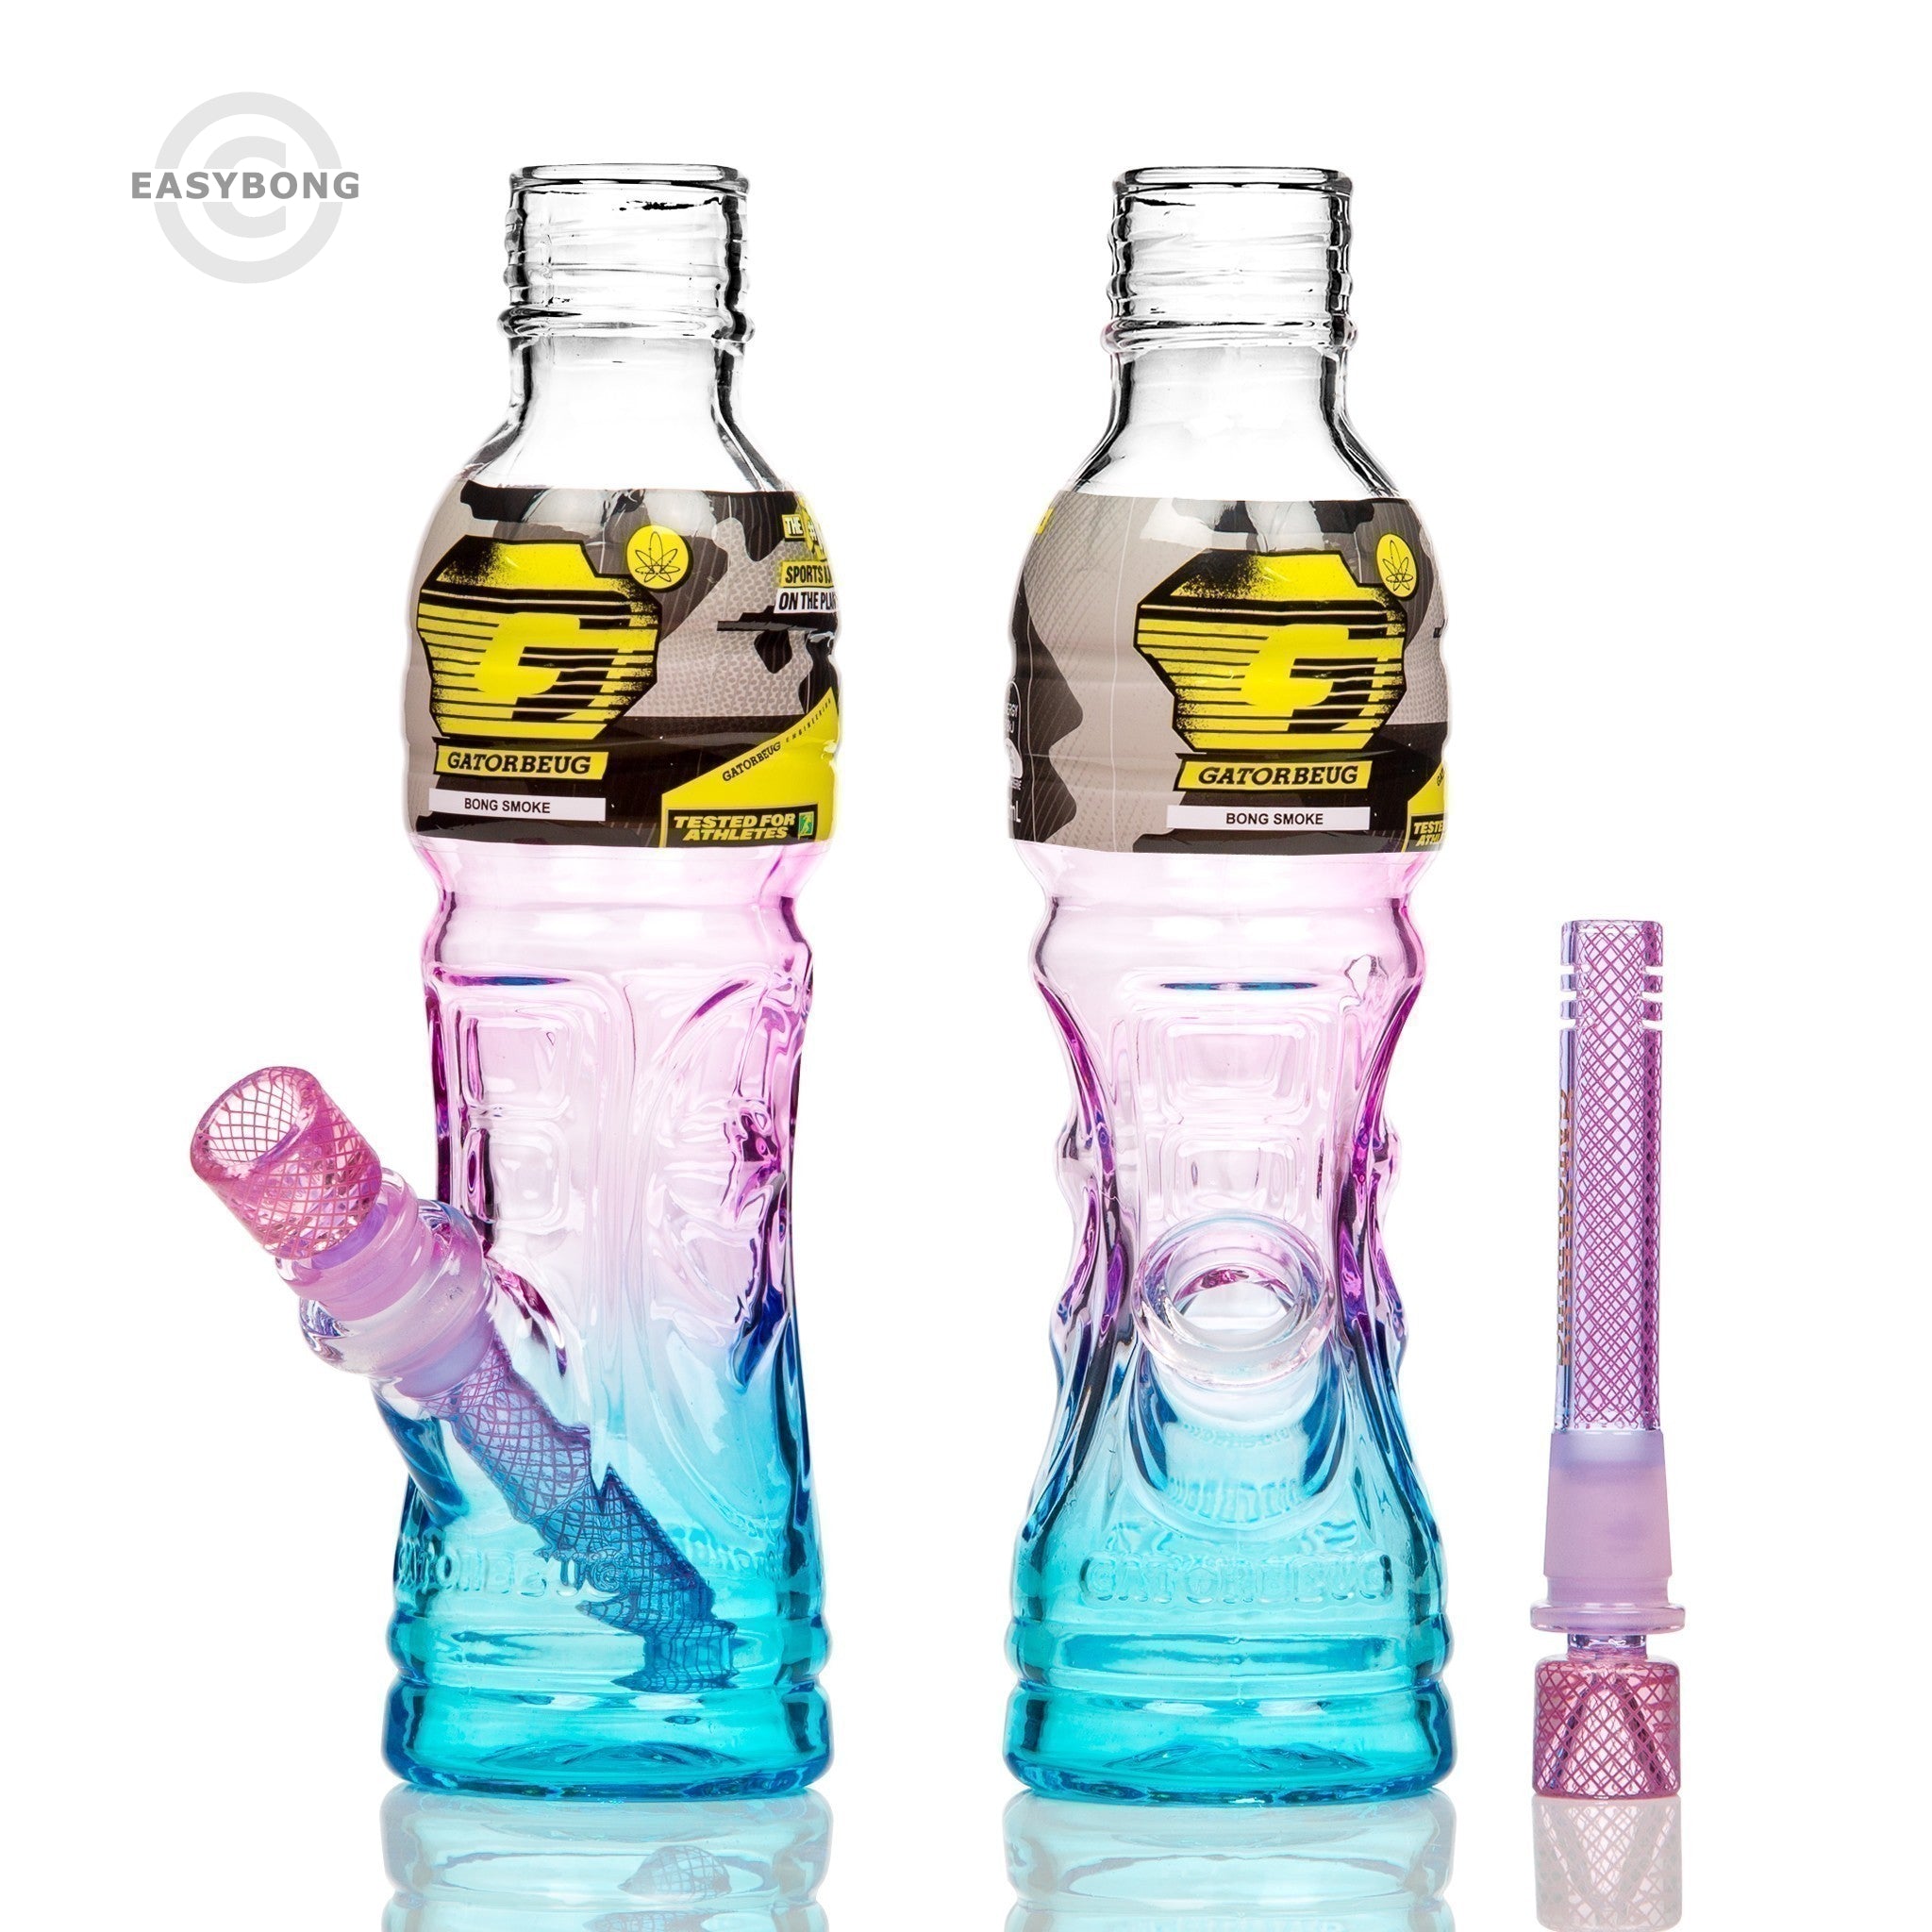 Gatorbeug sunset gator bongs and Aussie style waterpipes and other smoking accessories.